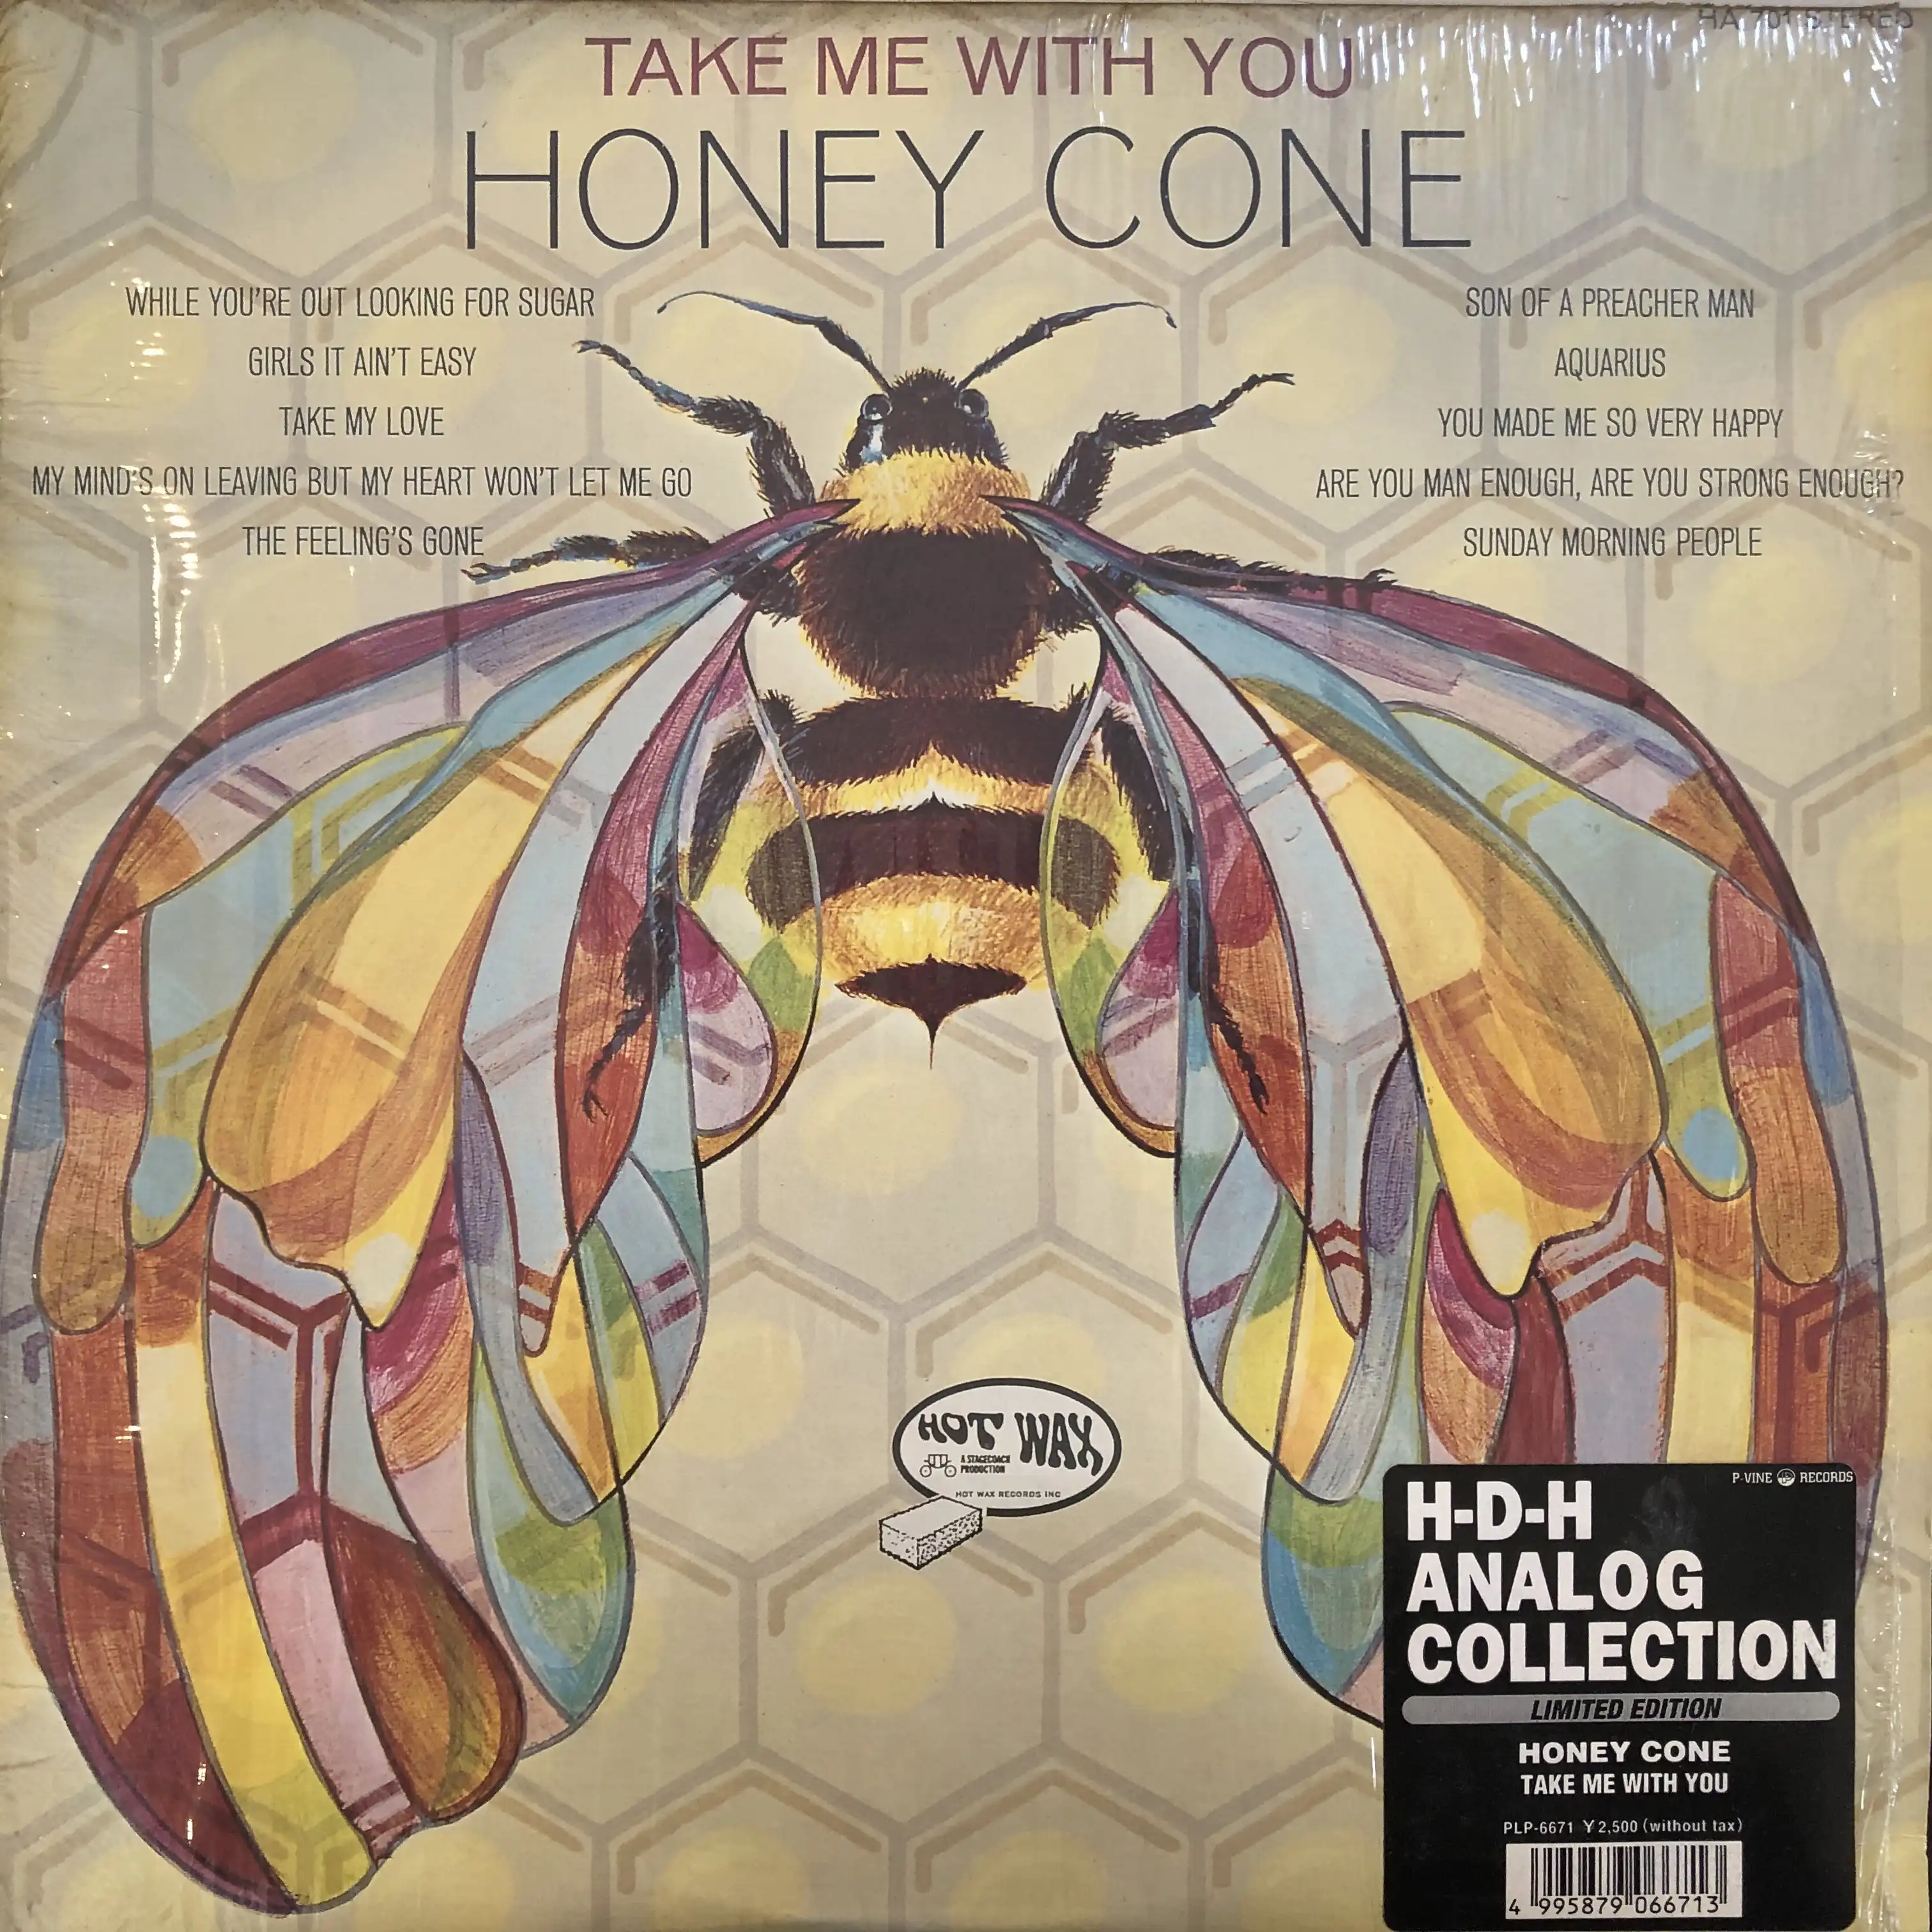 HONEY CONE / TAKE ME WITH YOU